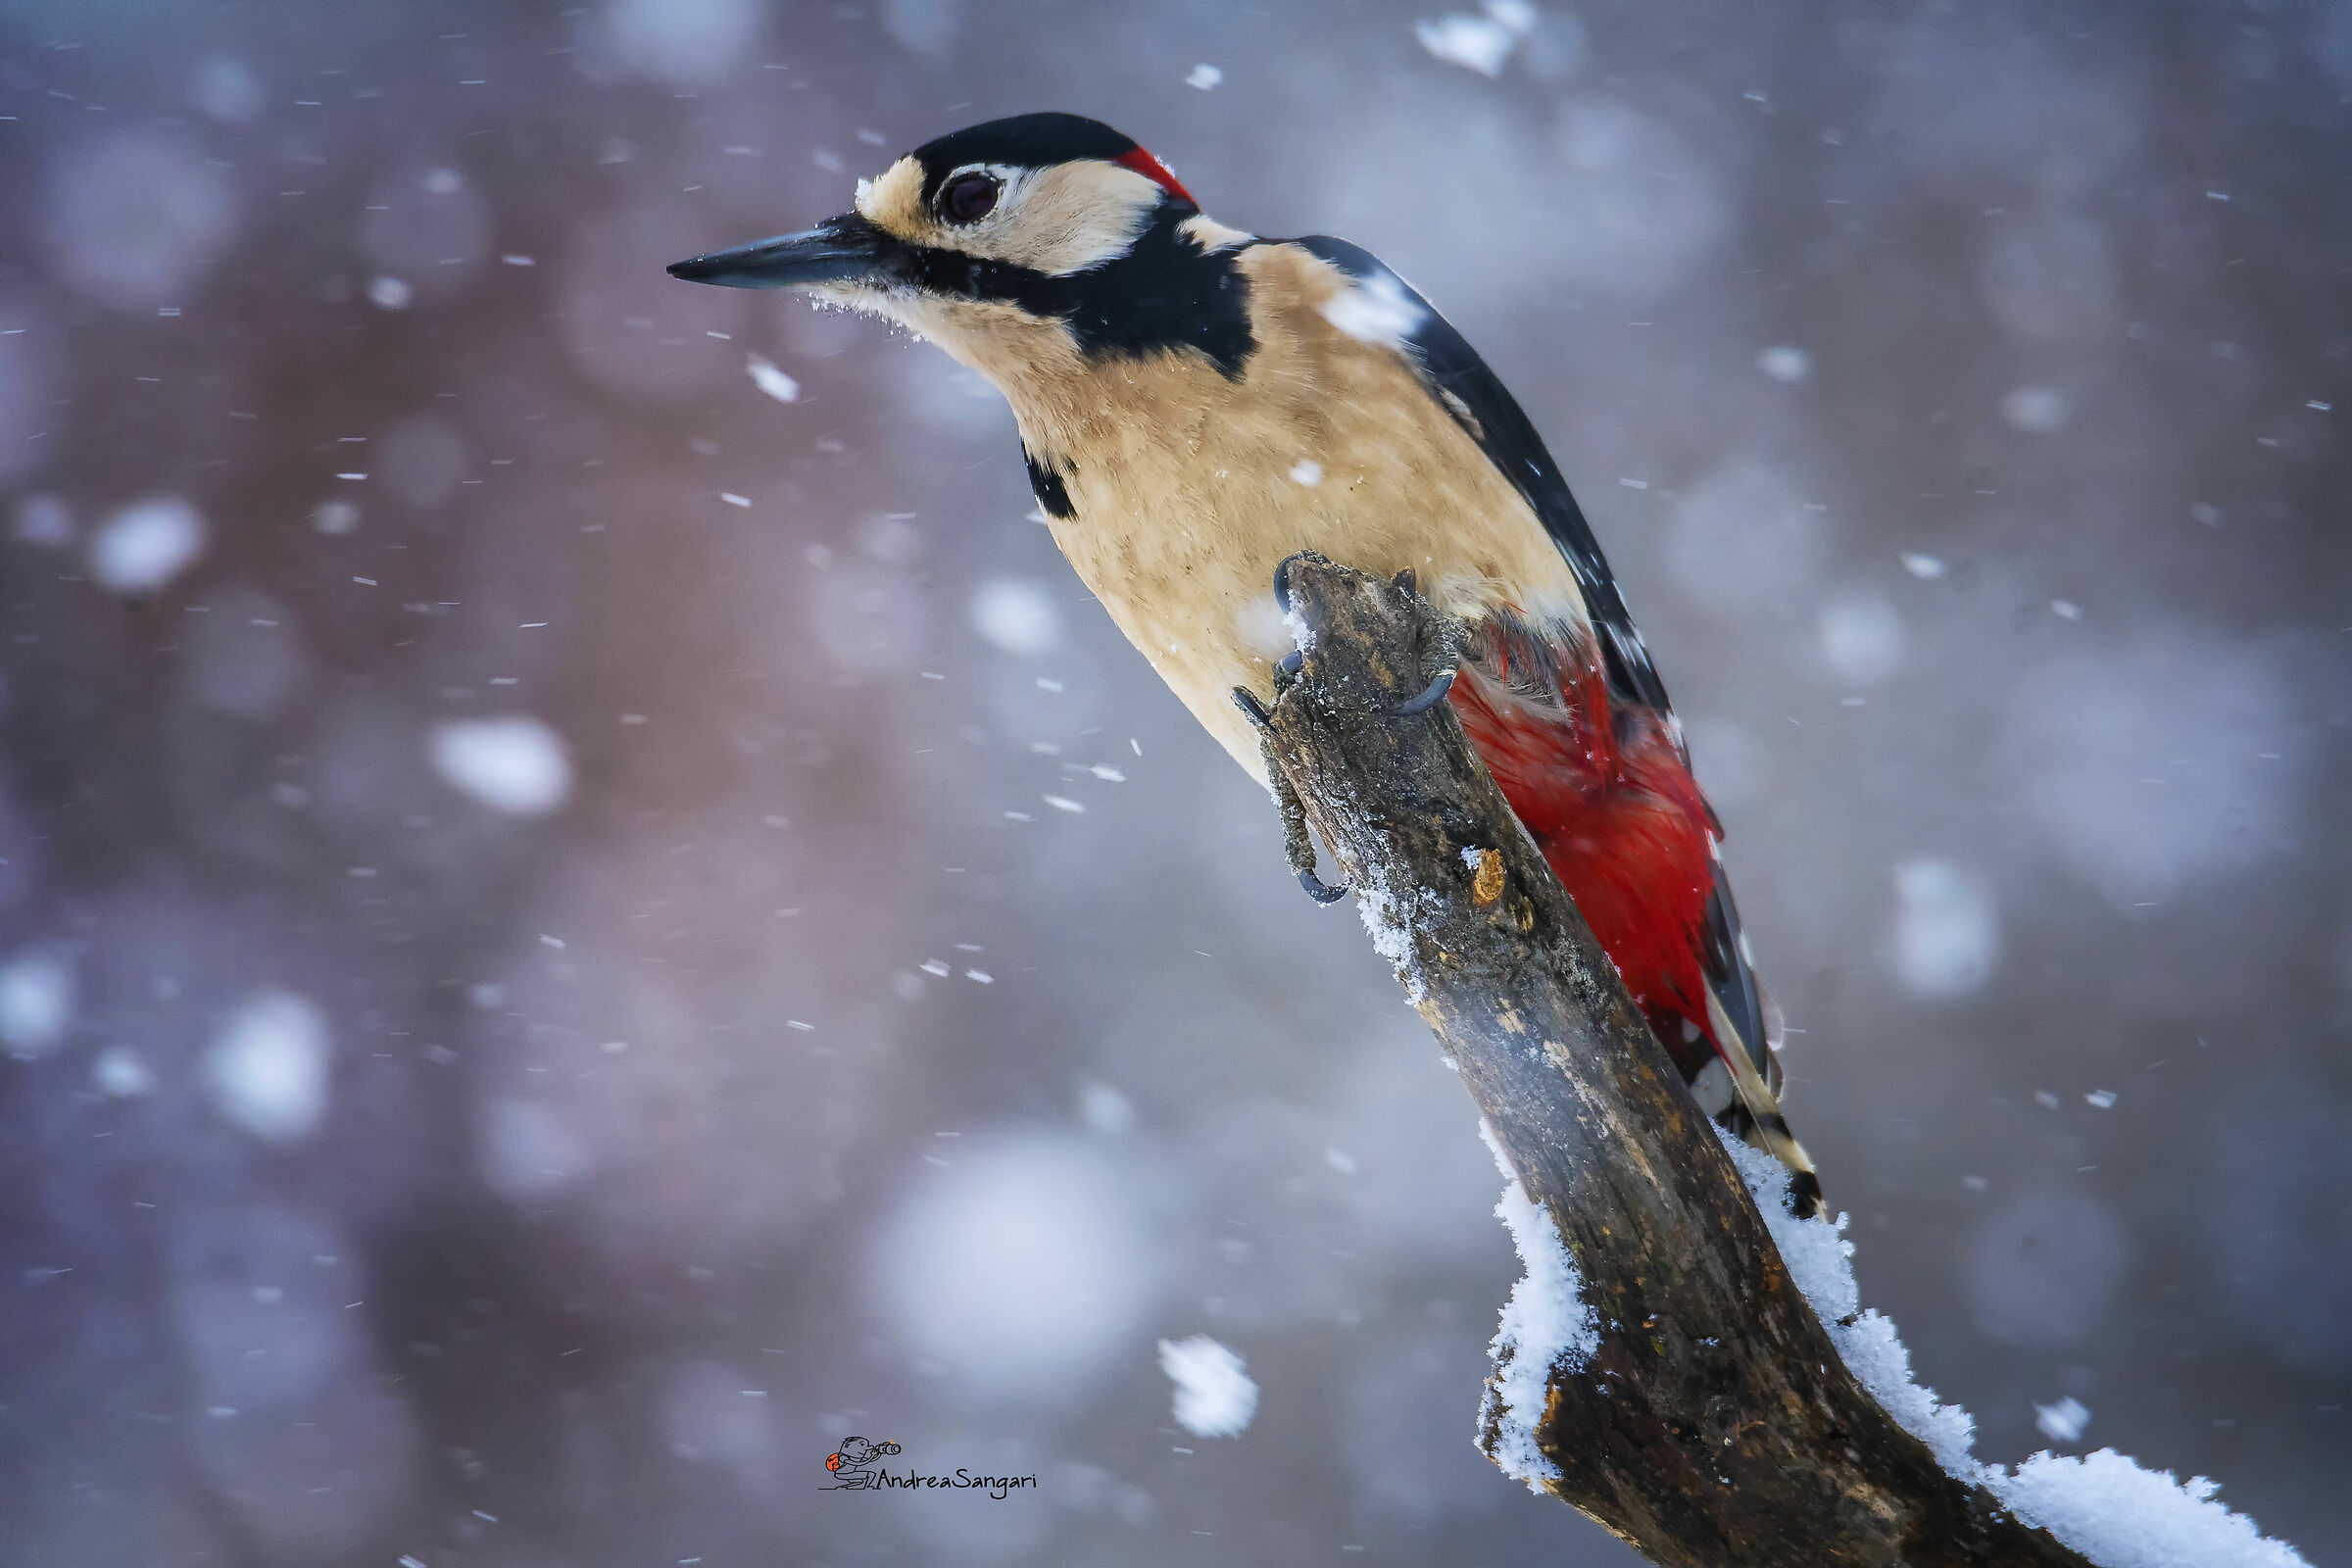 The red woodpeckers in the storm...